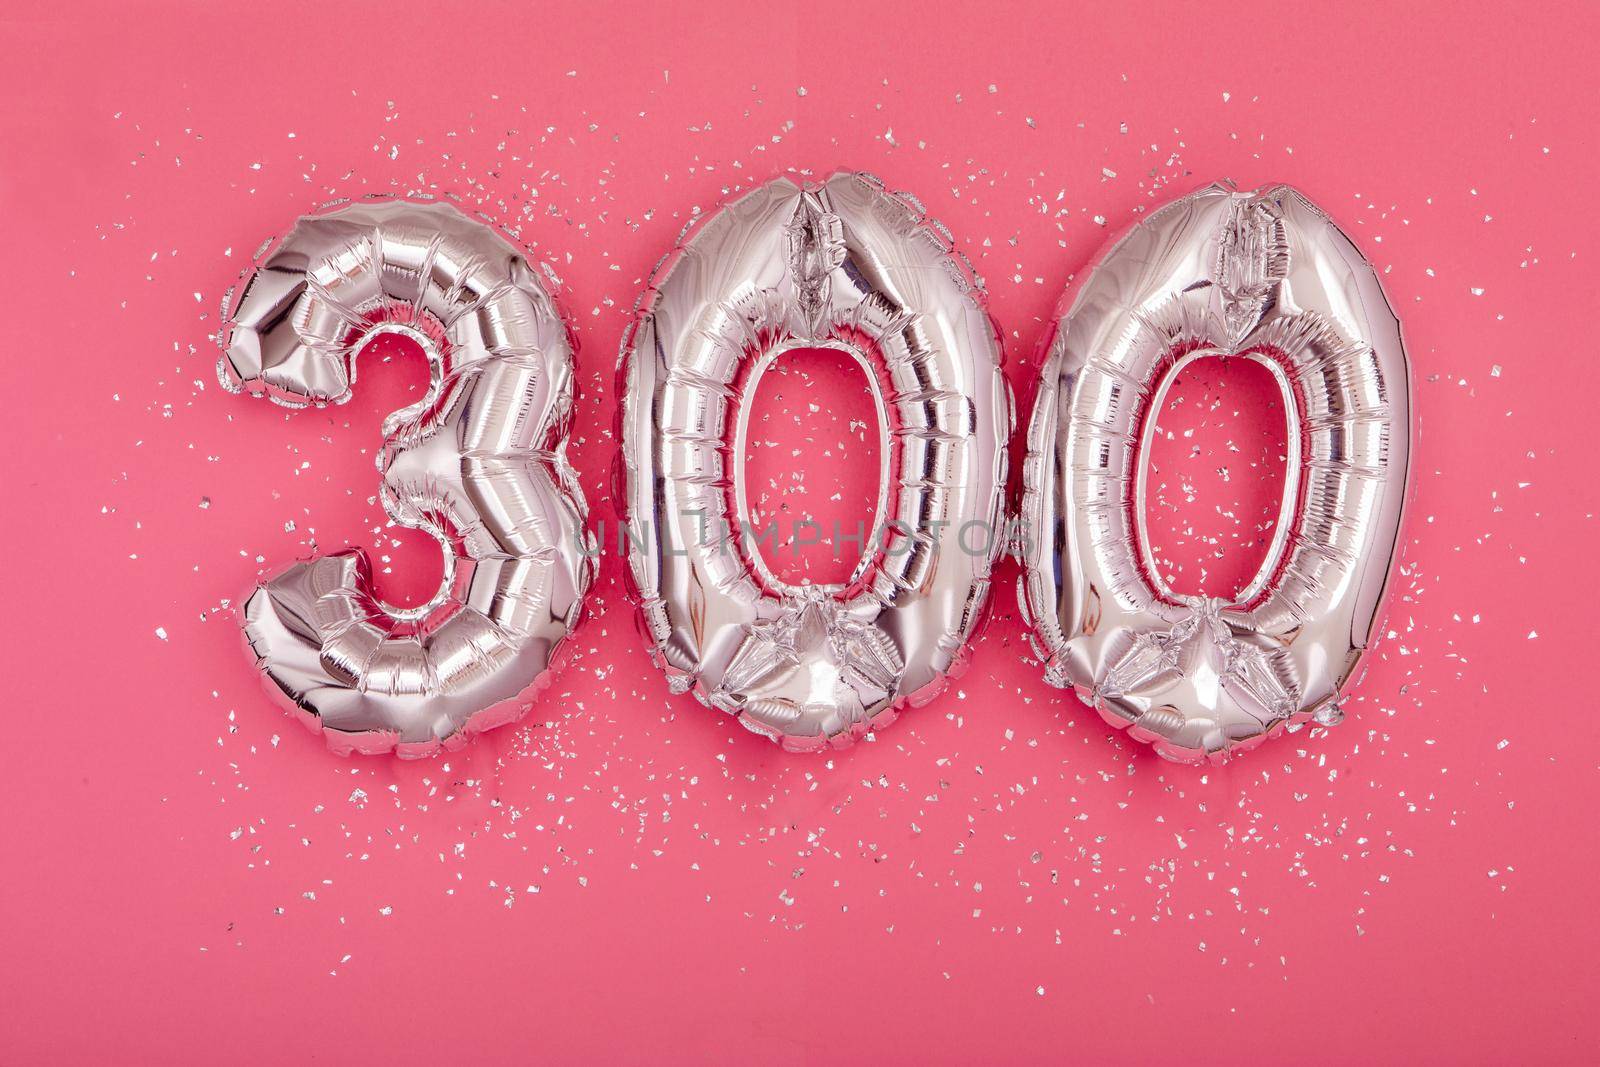 From above of silver shiny balloons demonstrating number 300 three hundred pink background with scattered glitter